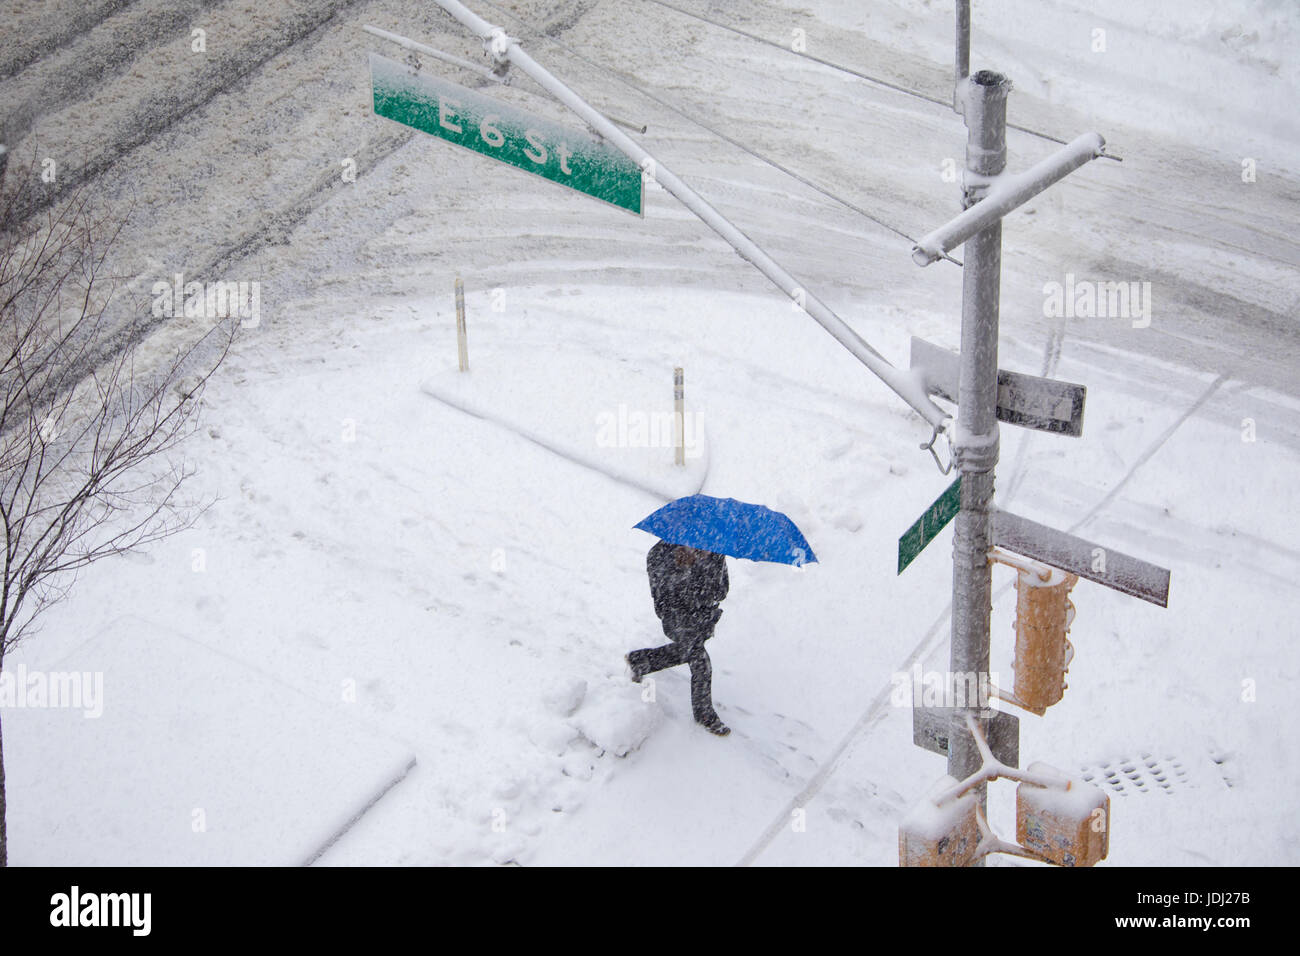 Snowing in the East Village, Manhattan, New York City Stock Photo